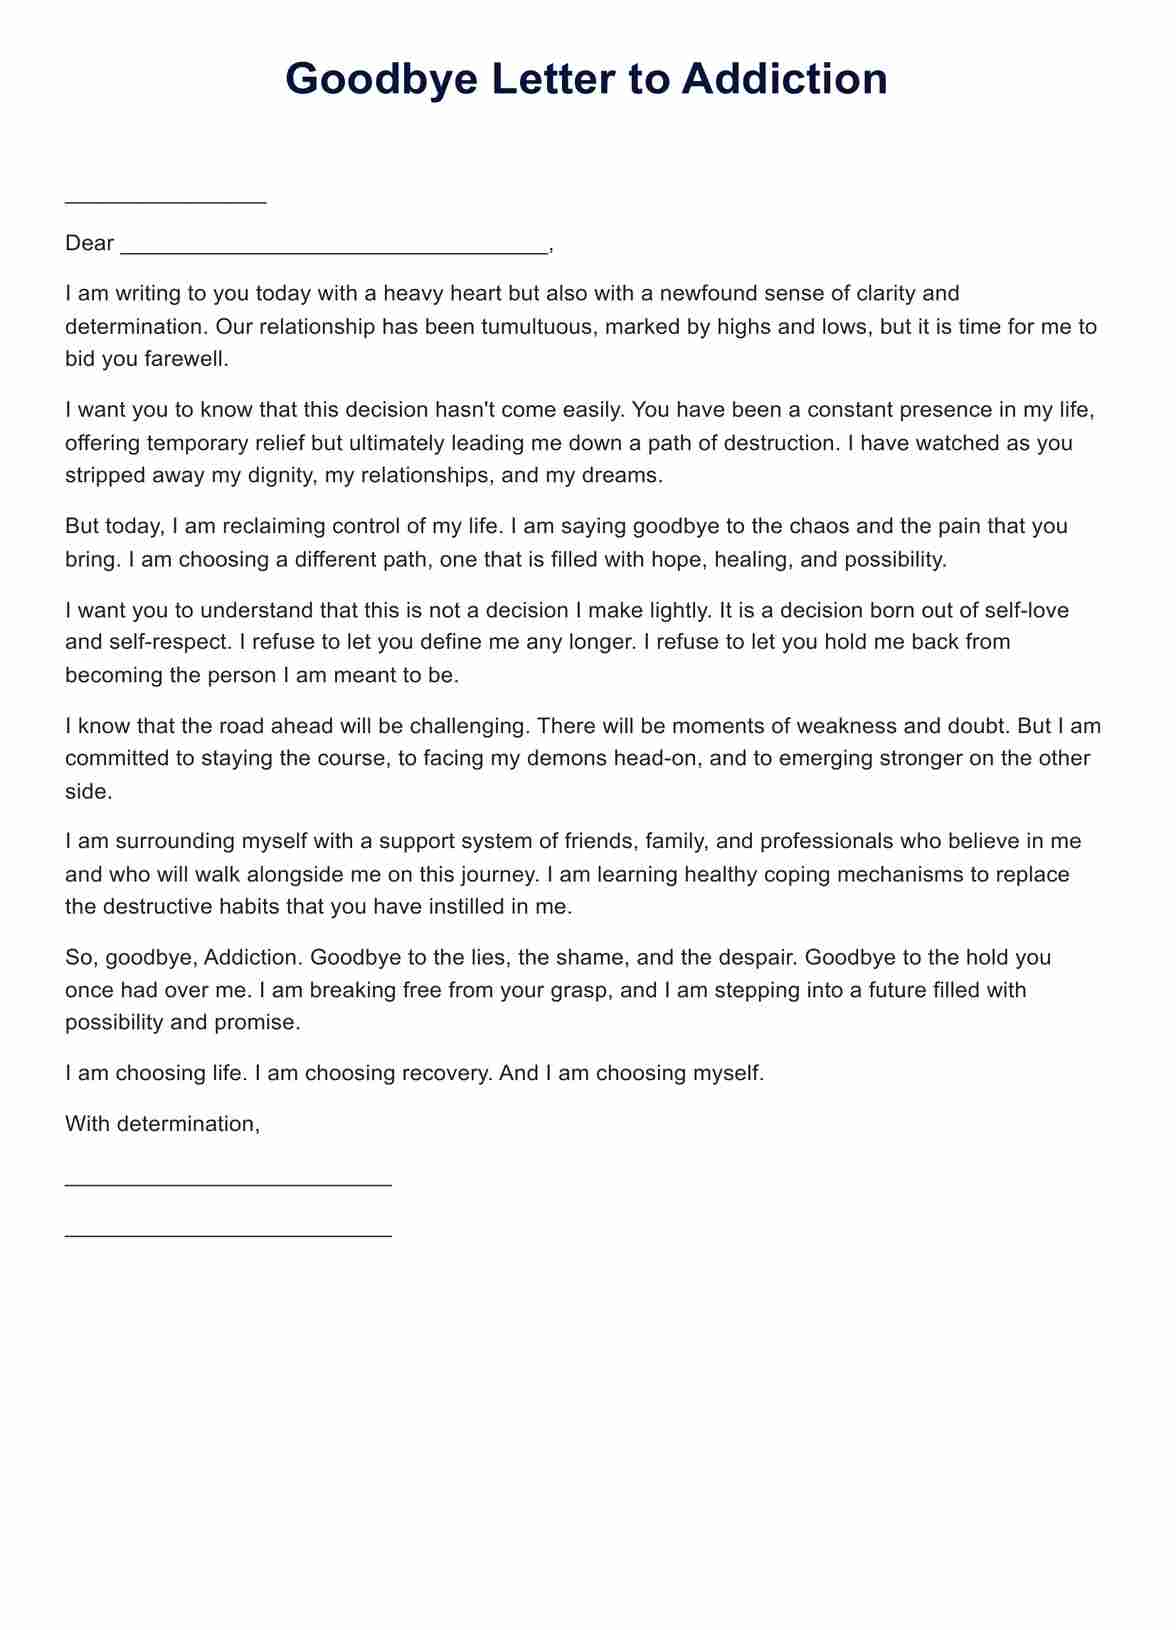 Goodbye Letter to Addiction PDF Example